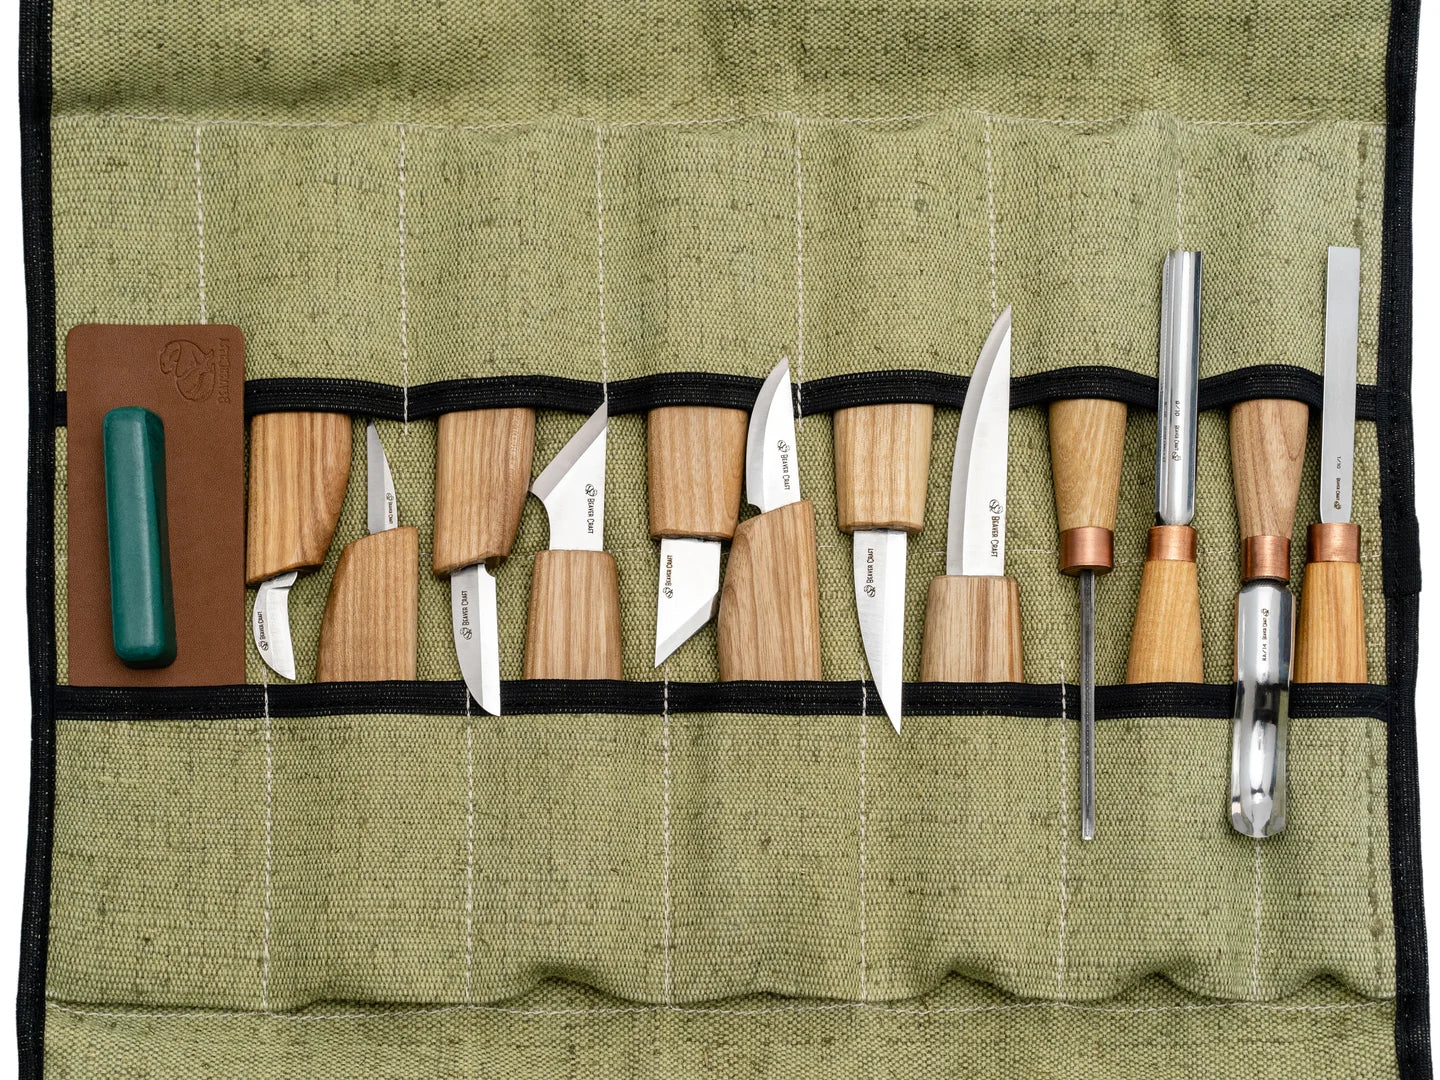 Wood Carving Set of 12 Knives in Tool Roll BEST SET of Woodcarving